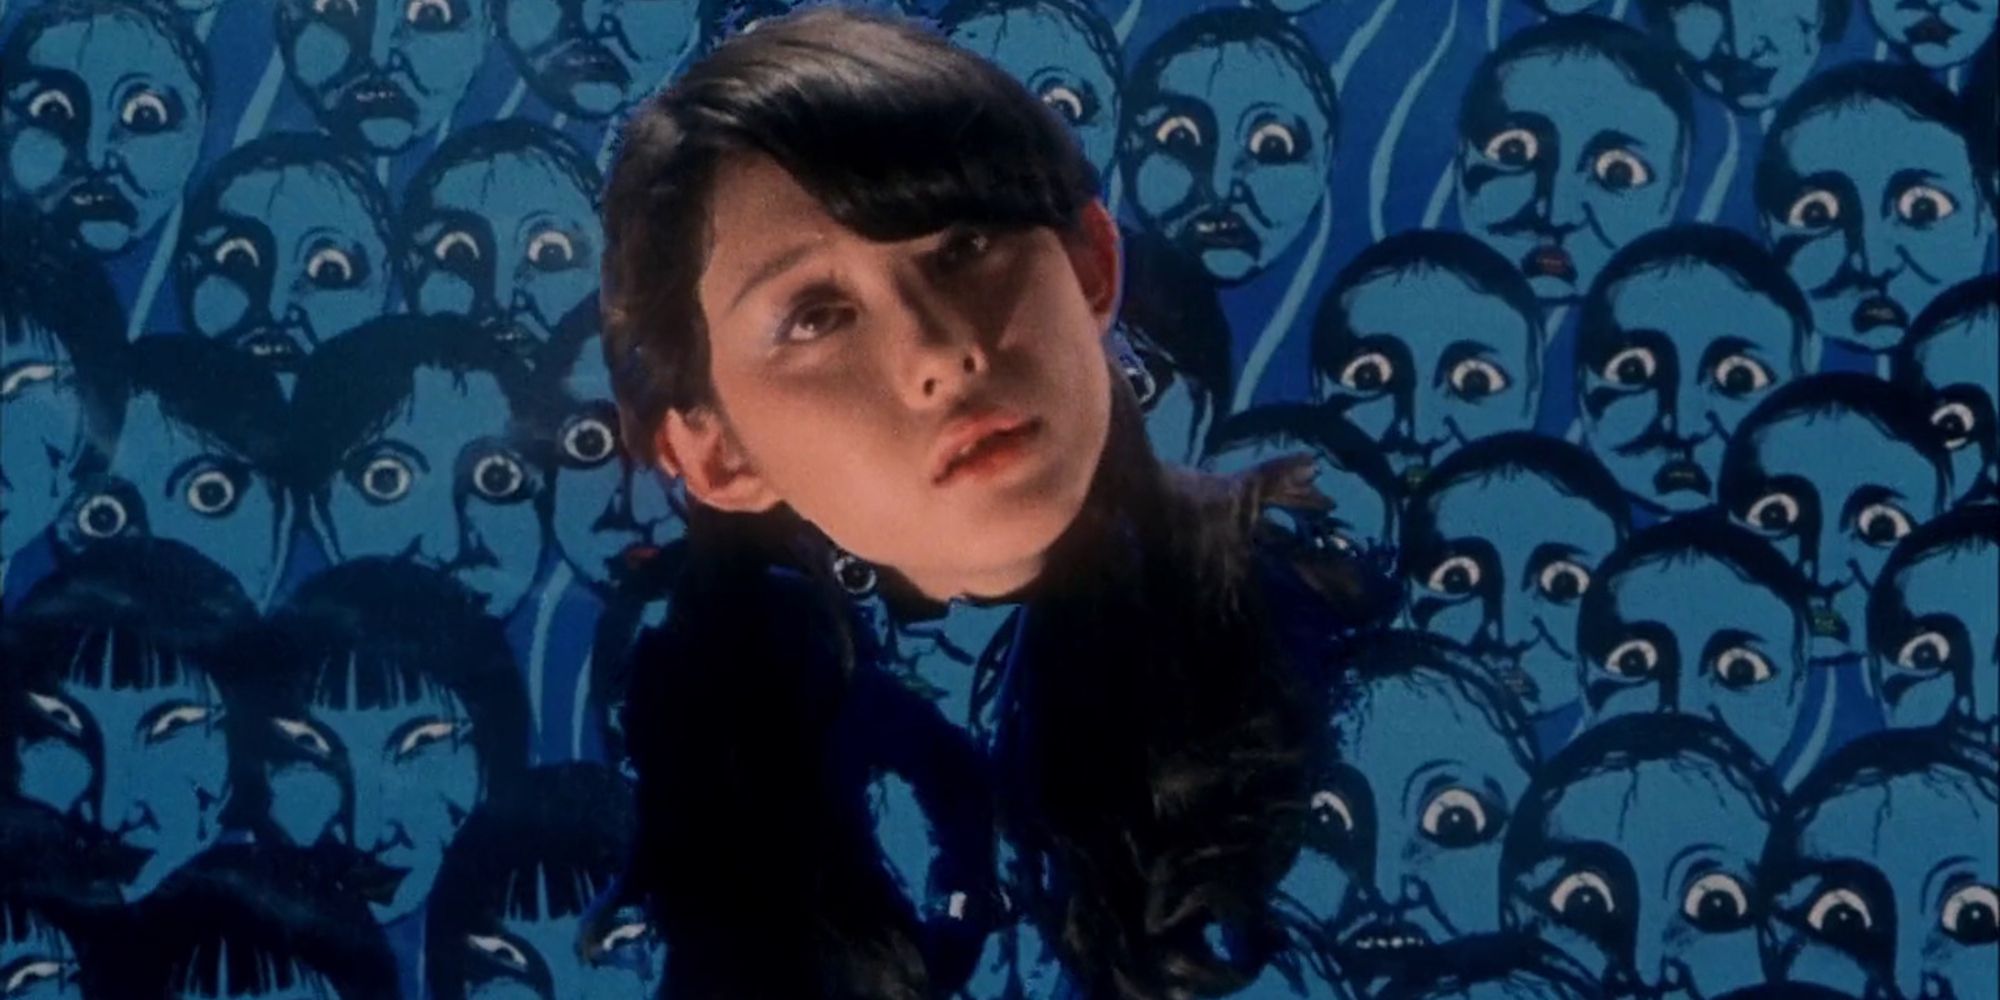 A girl's head pokes through a wall with eerie blue wallpaper of painted faces.